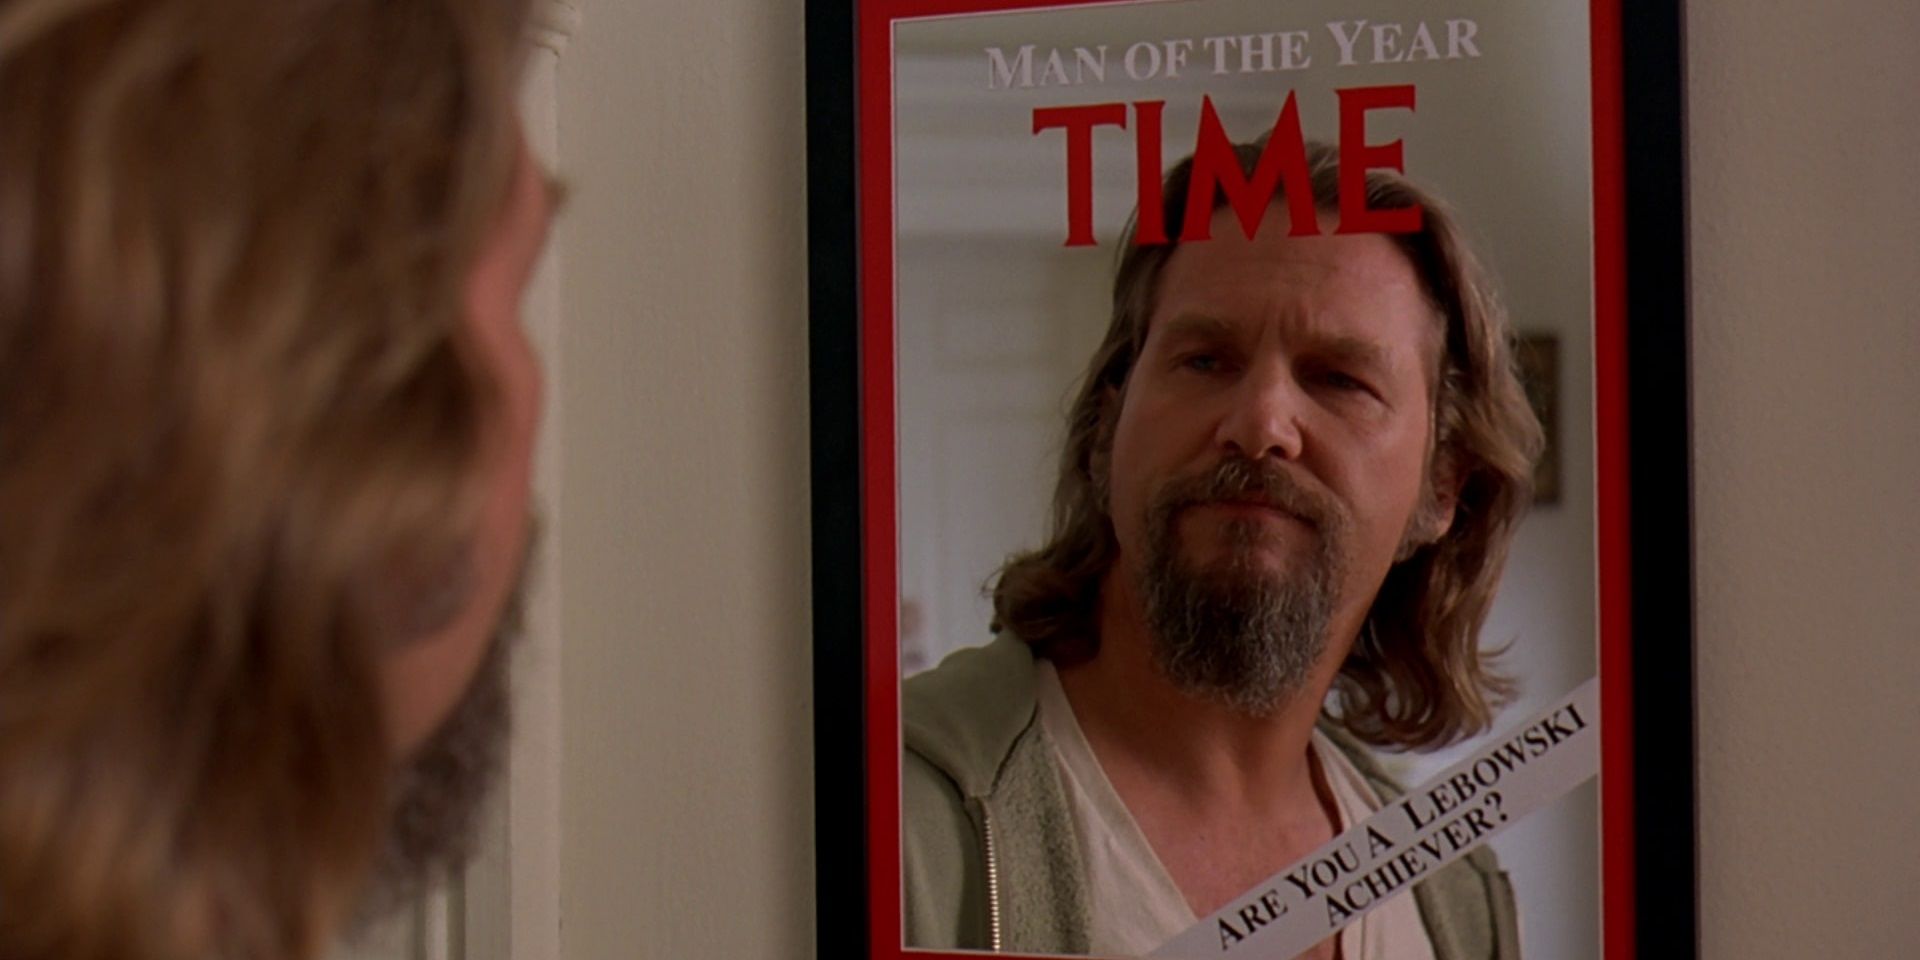 The Dude sees himself as Time's Man of the Year in The Big Lebowski